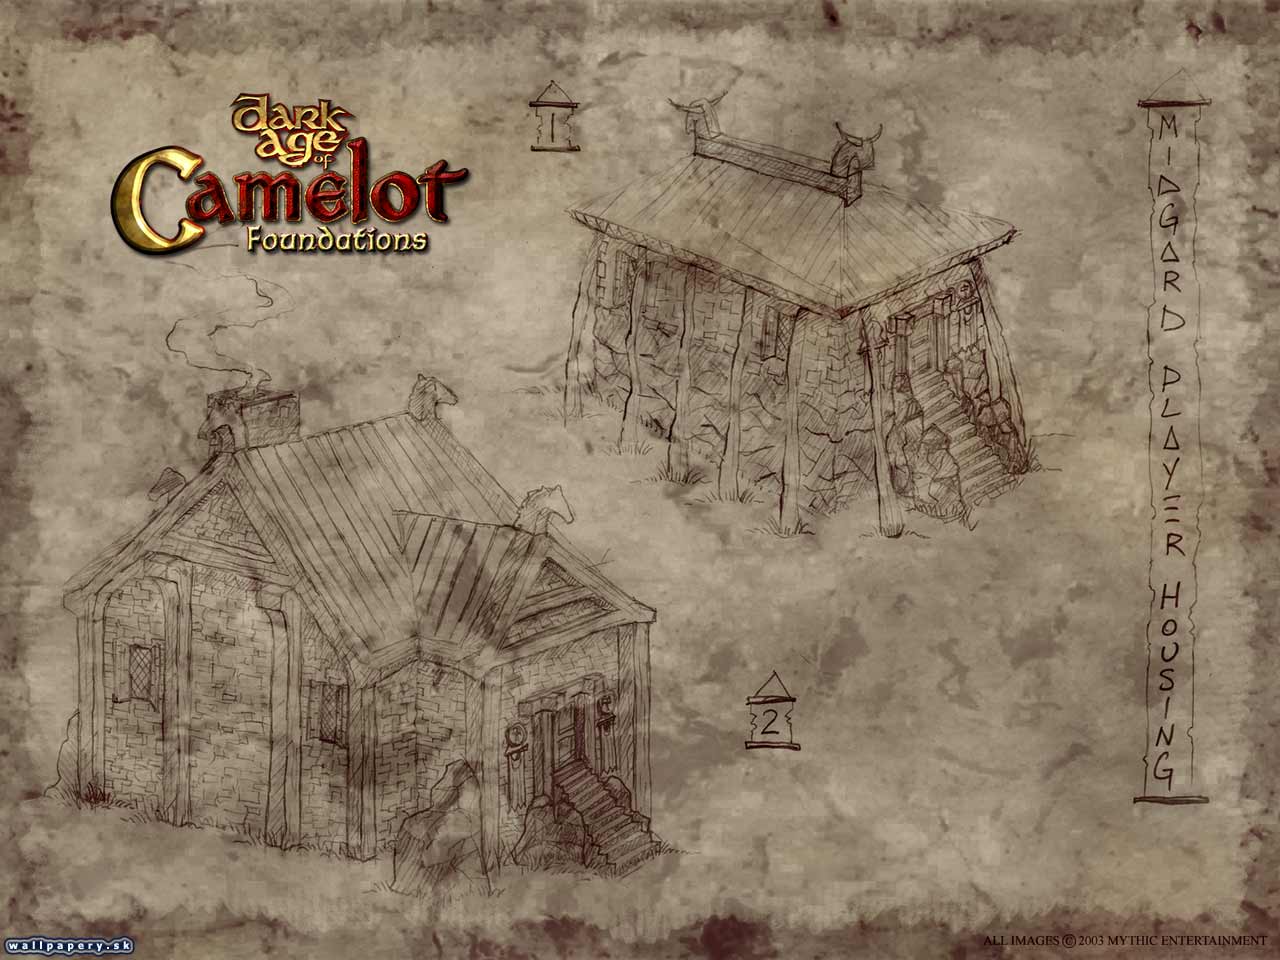 Dark Age of Camelot: Foundations - wallpaper 4